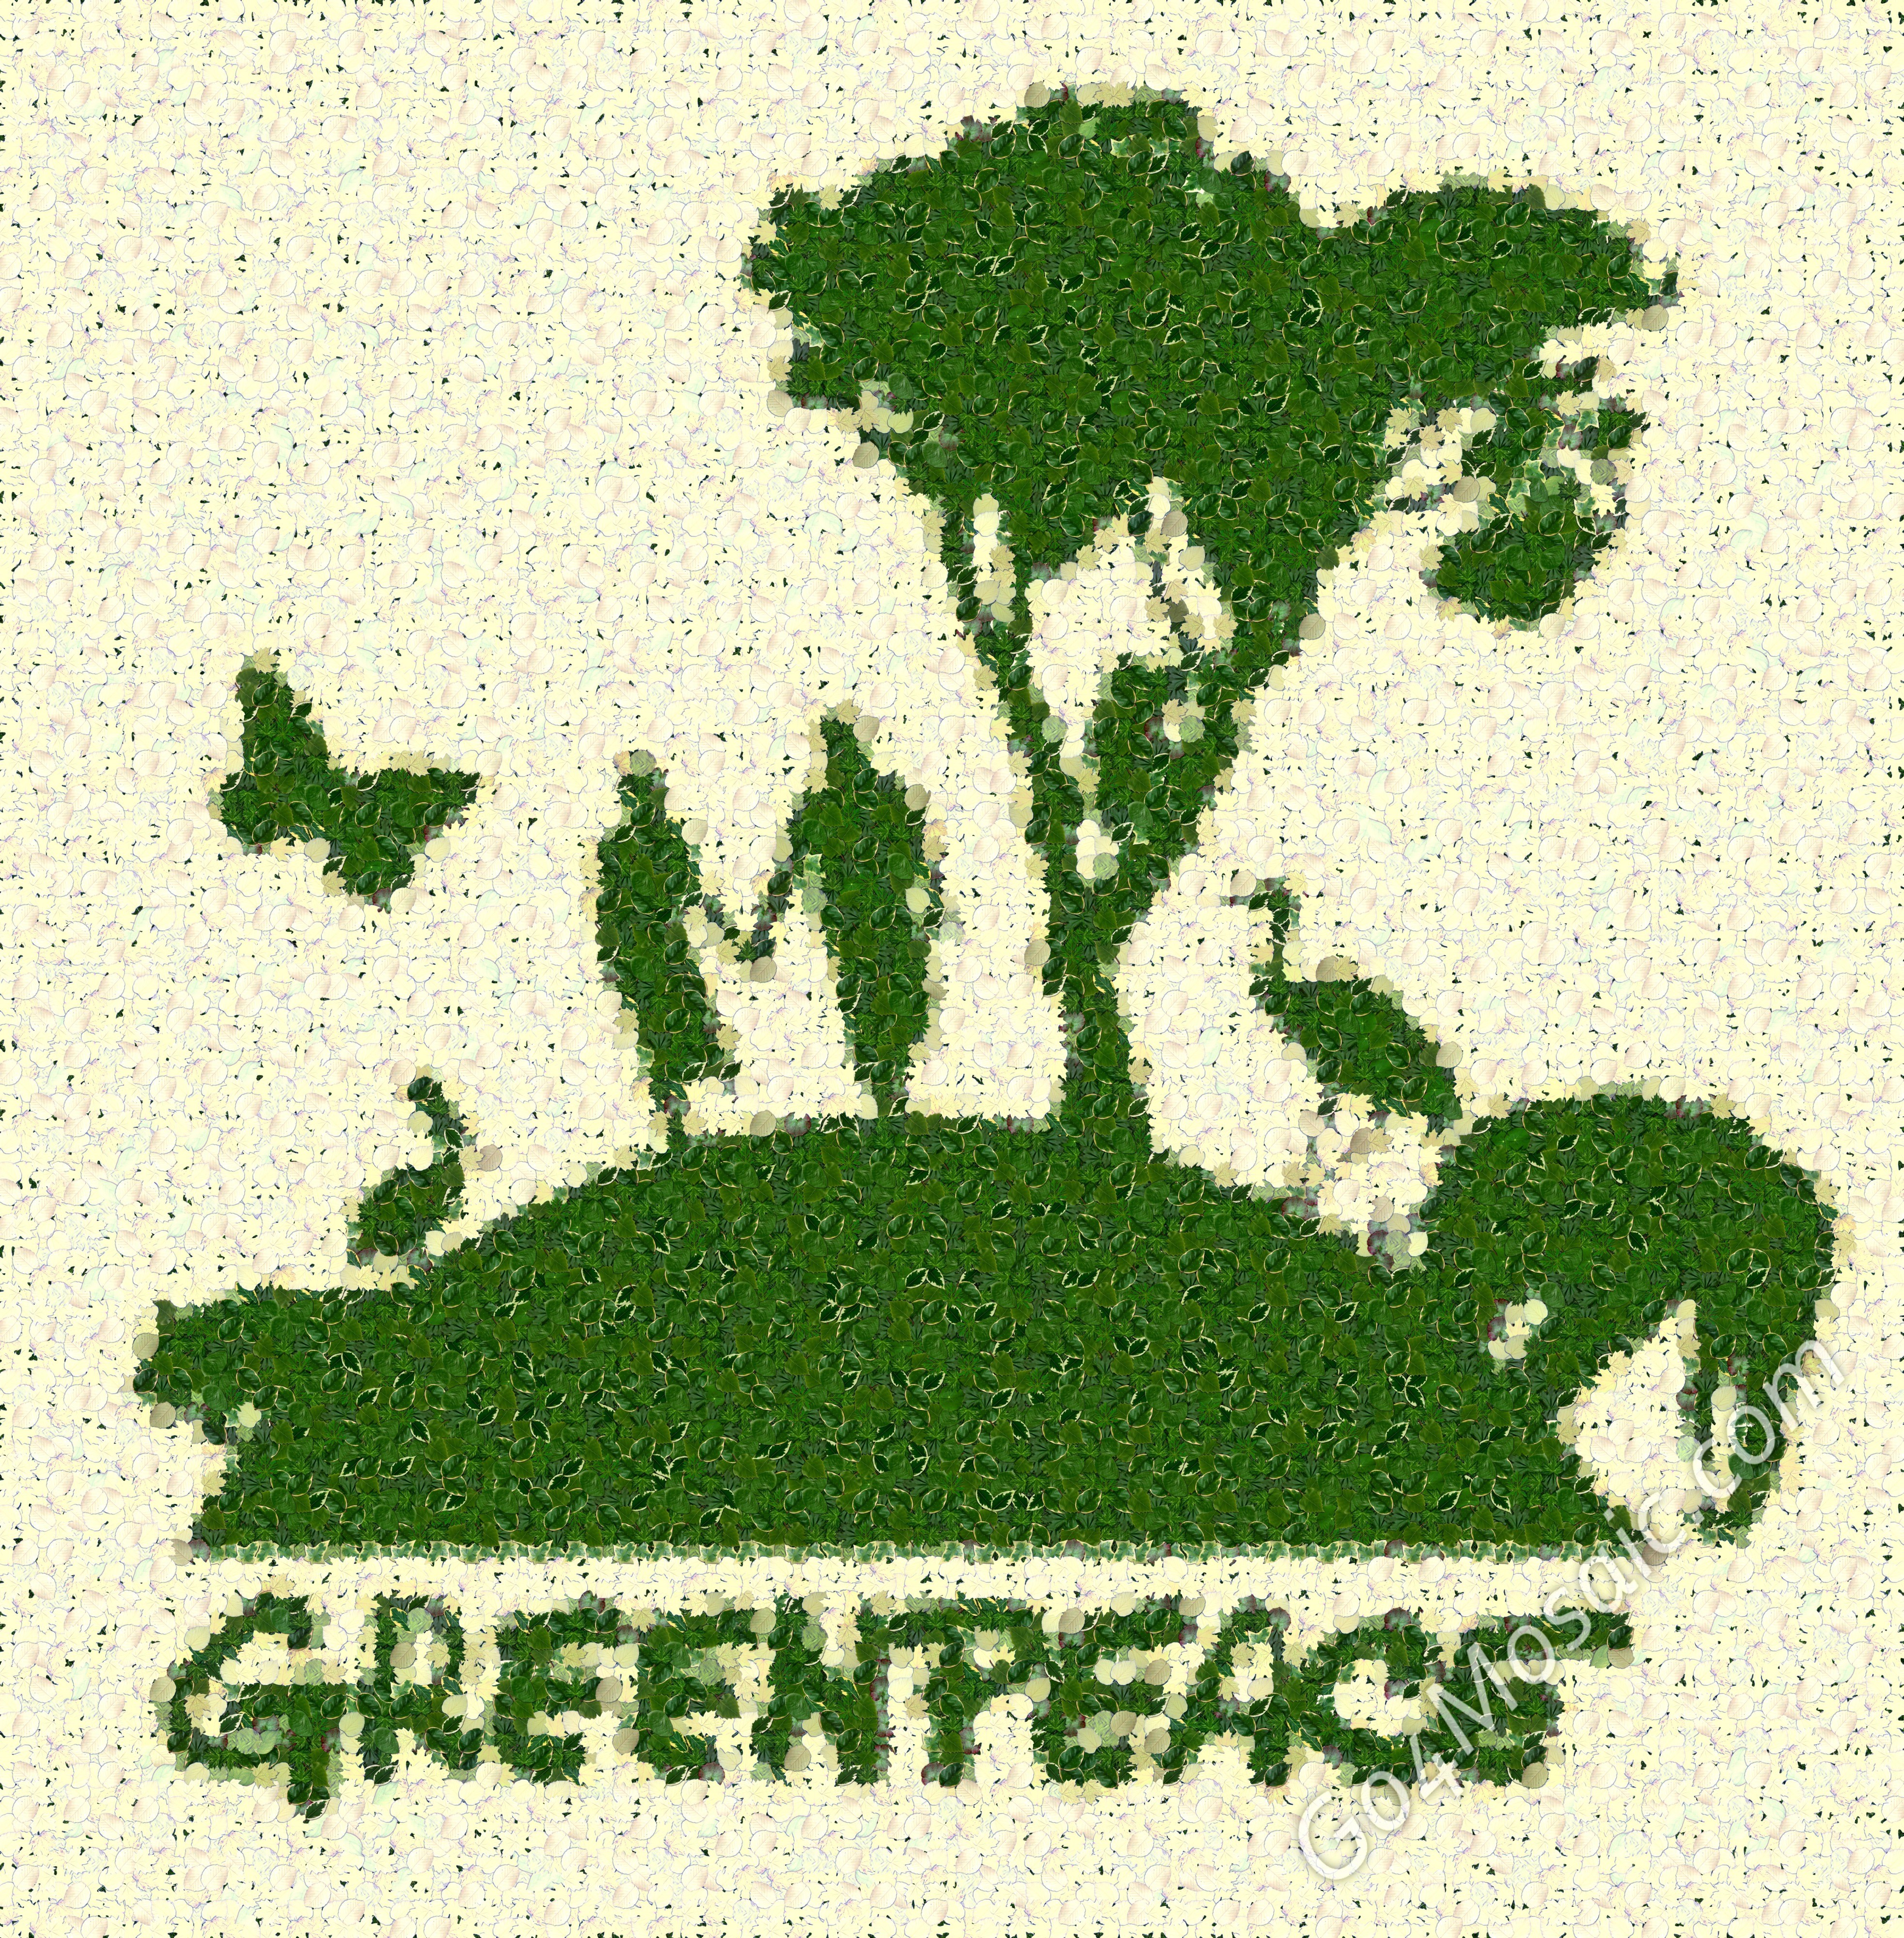 Greenpeace mosaic from Leaves